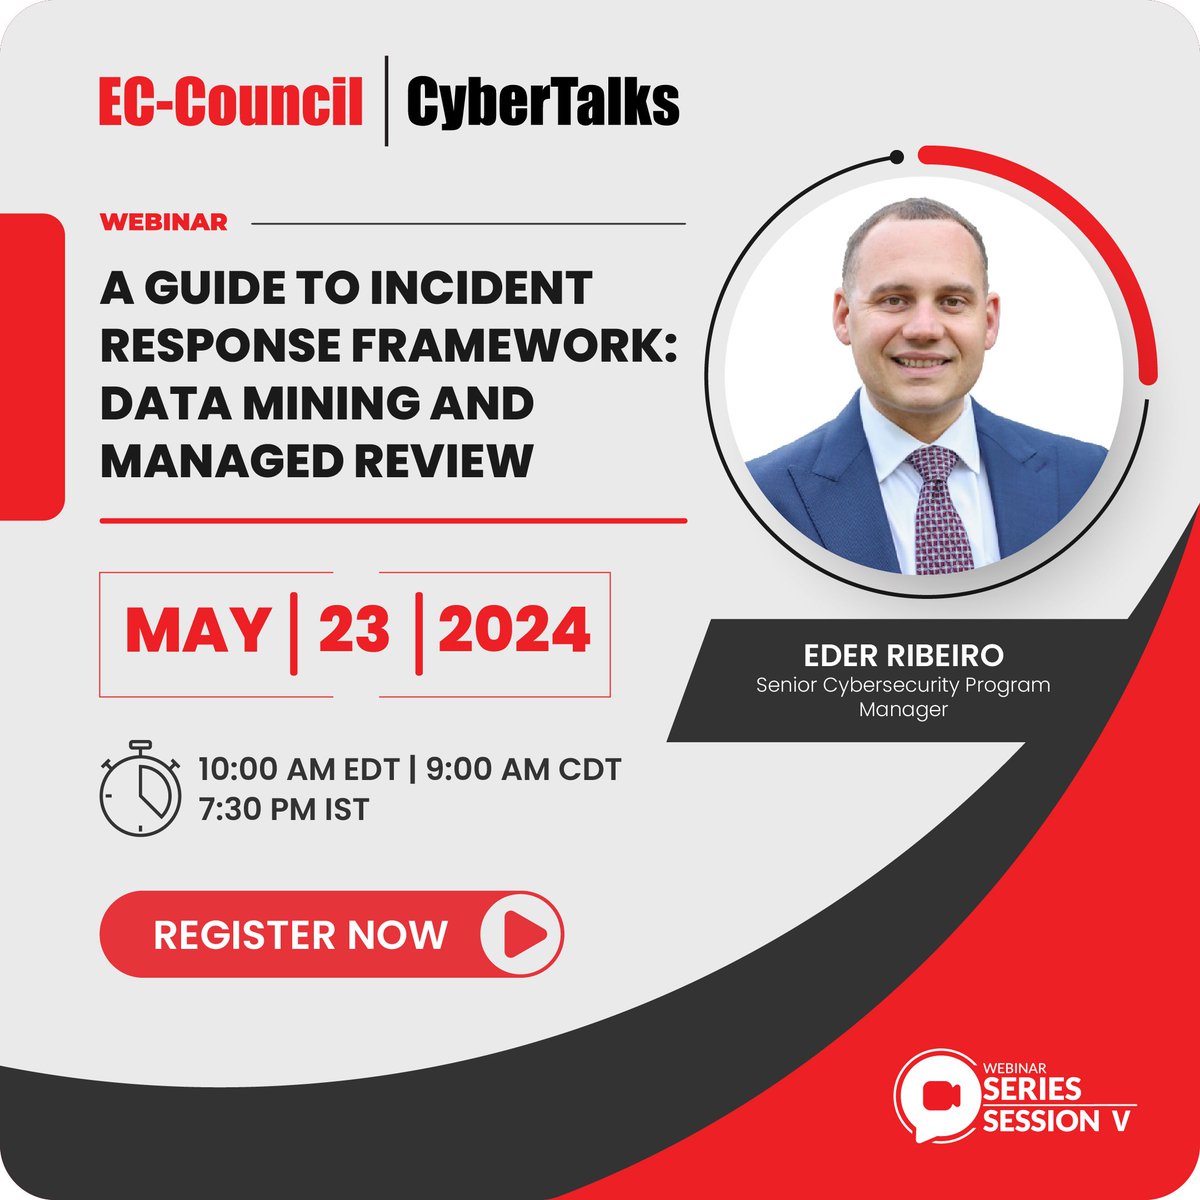 Explore proactive mitigation tactics against the potential pain points arising from #DataMining and #ManagedReview processes in this #Webinar with Eder Ribeiro. 

Register now: buff.ly/4bmDzgF  

#ECCouncil #Cybersecurity #ECIH #IncidentResponse #IRPlanning #IRLifecycle